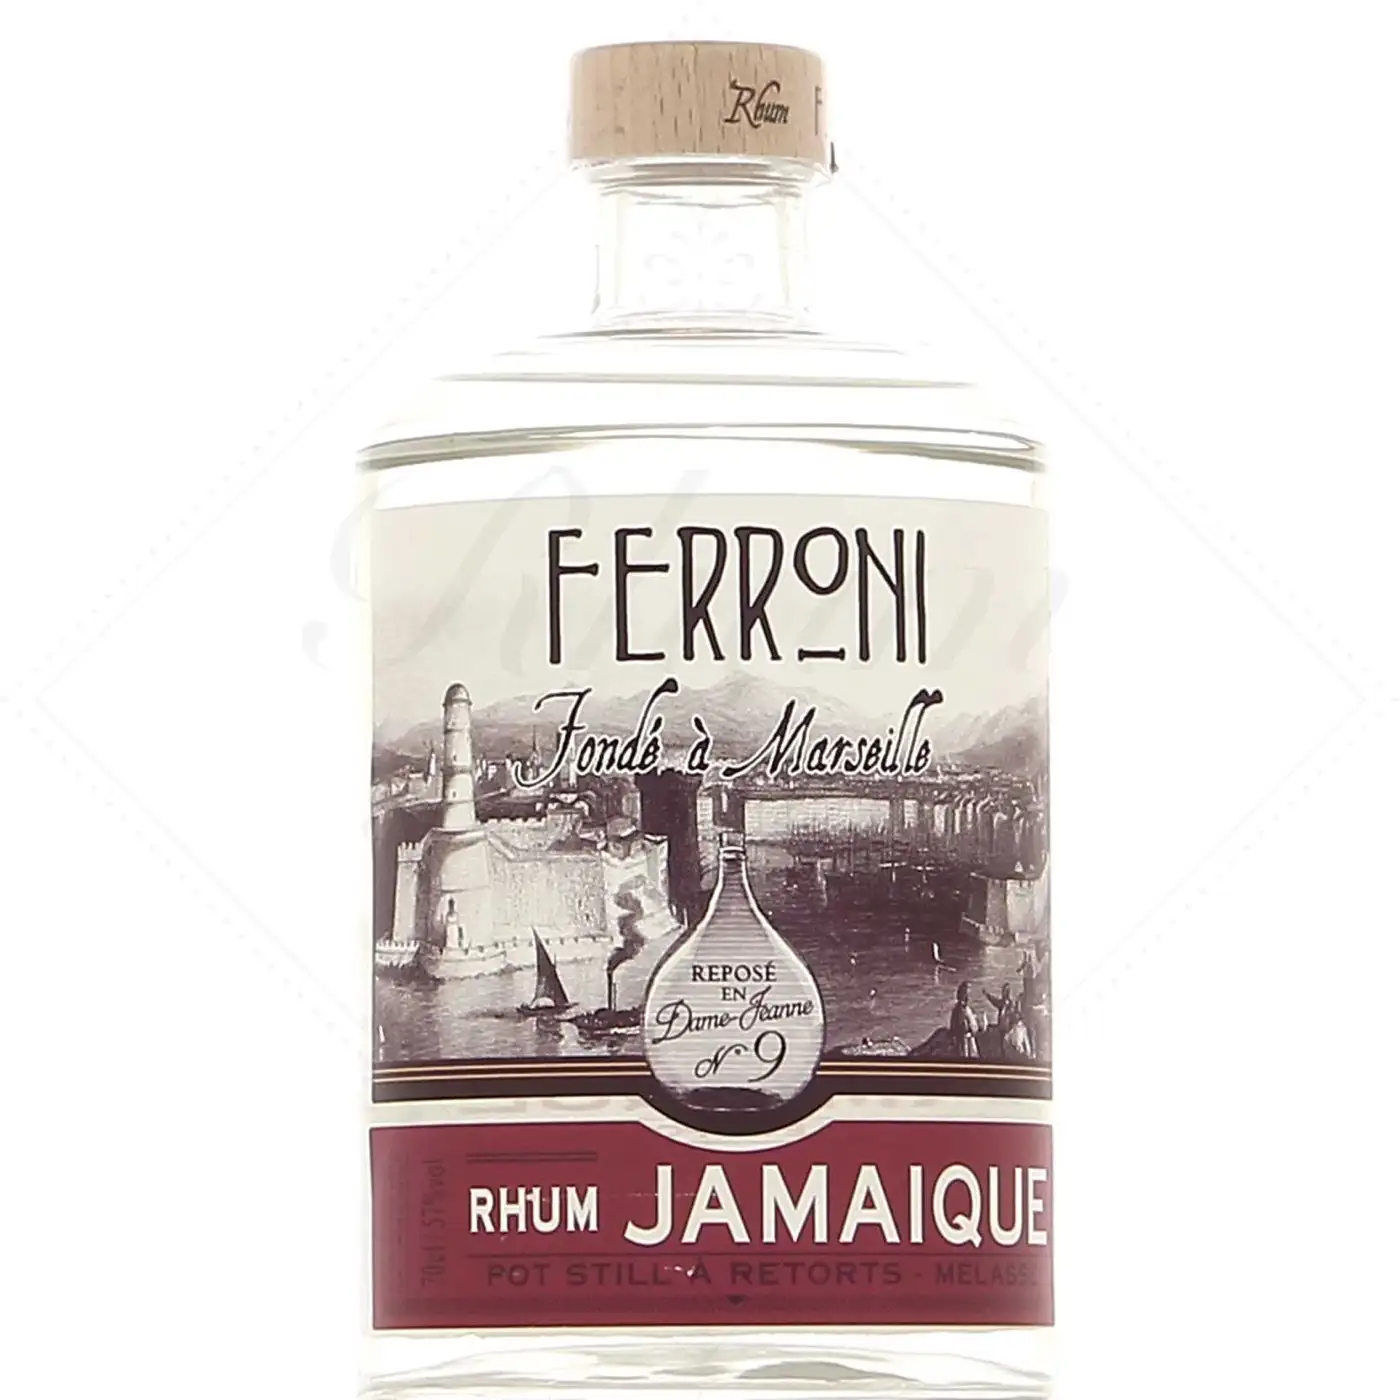 Image of the front of the bottle of the rum La Dame Jeanne 9 Jamaïque